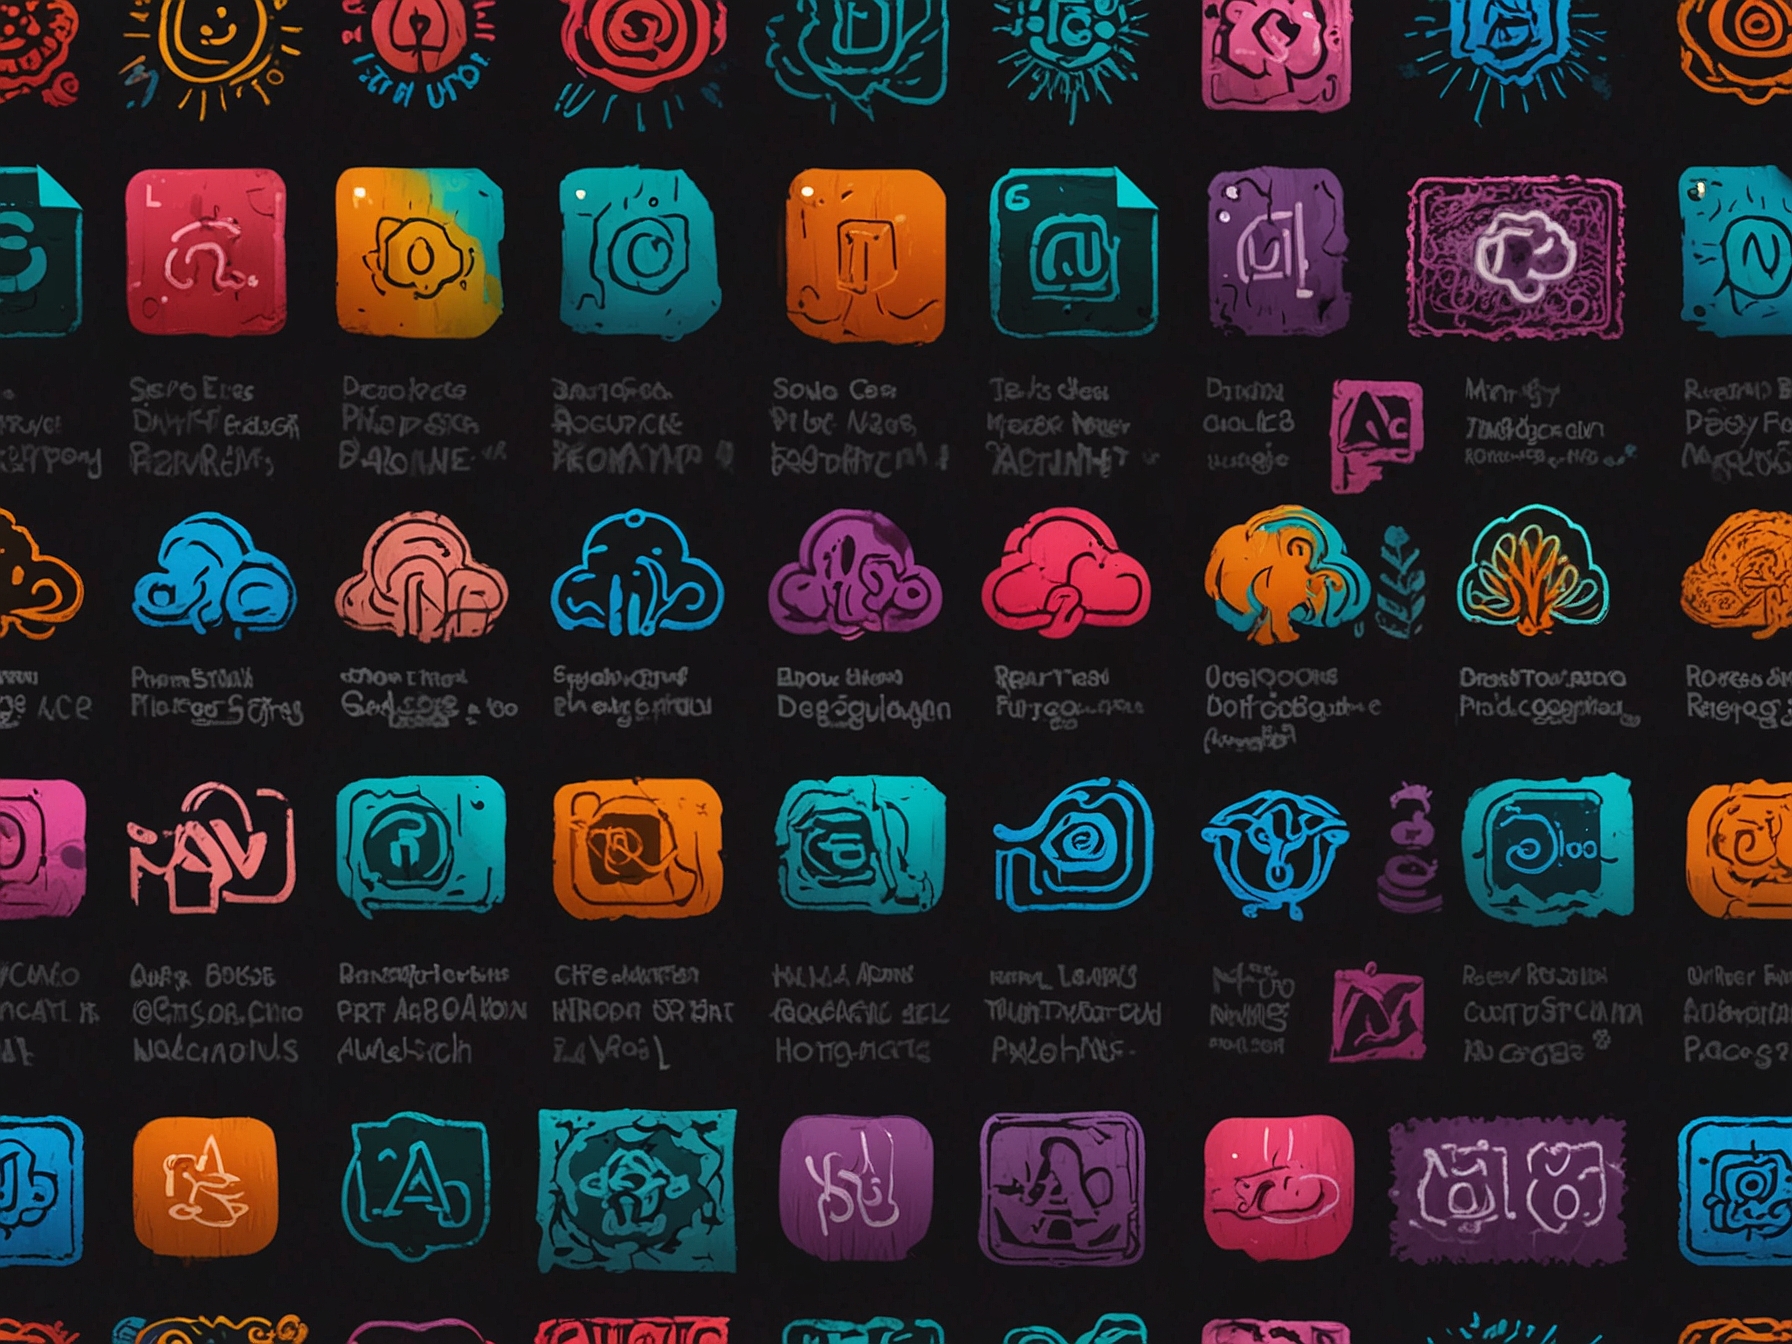 Illustration of Adobe Creative Cloud applications, showcasing icons for Photoshop, Illustrator, and Premiere Pro, highlighting the diverse tools available within the subscription service.